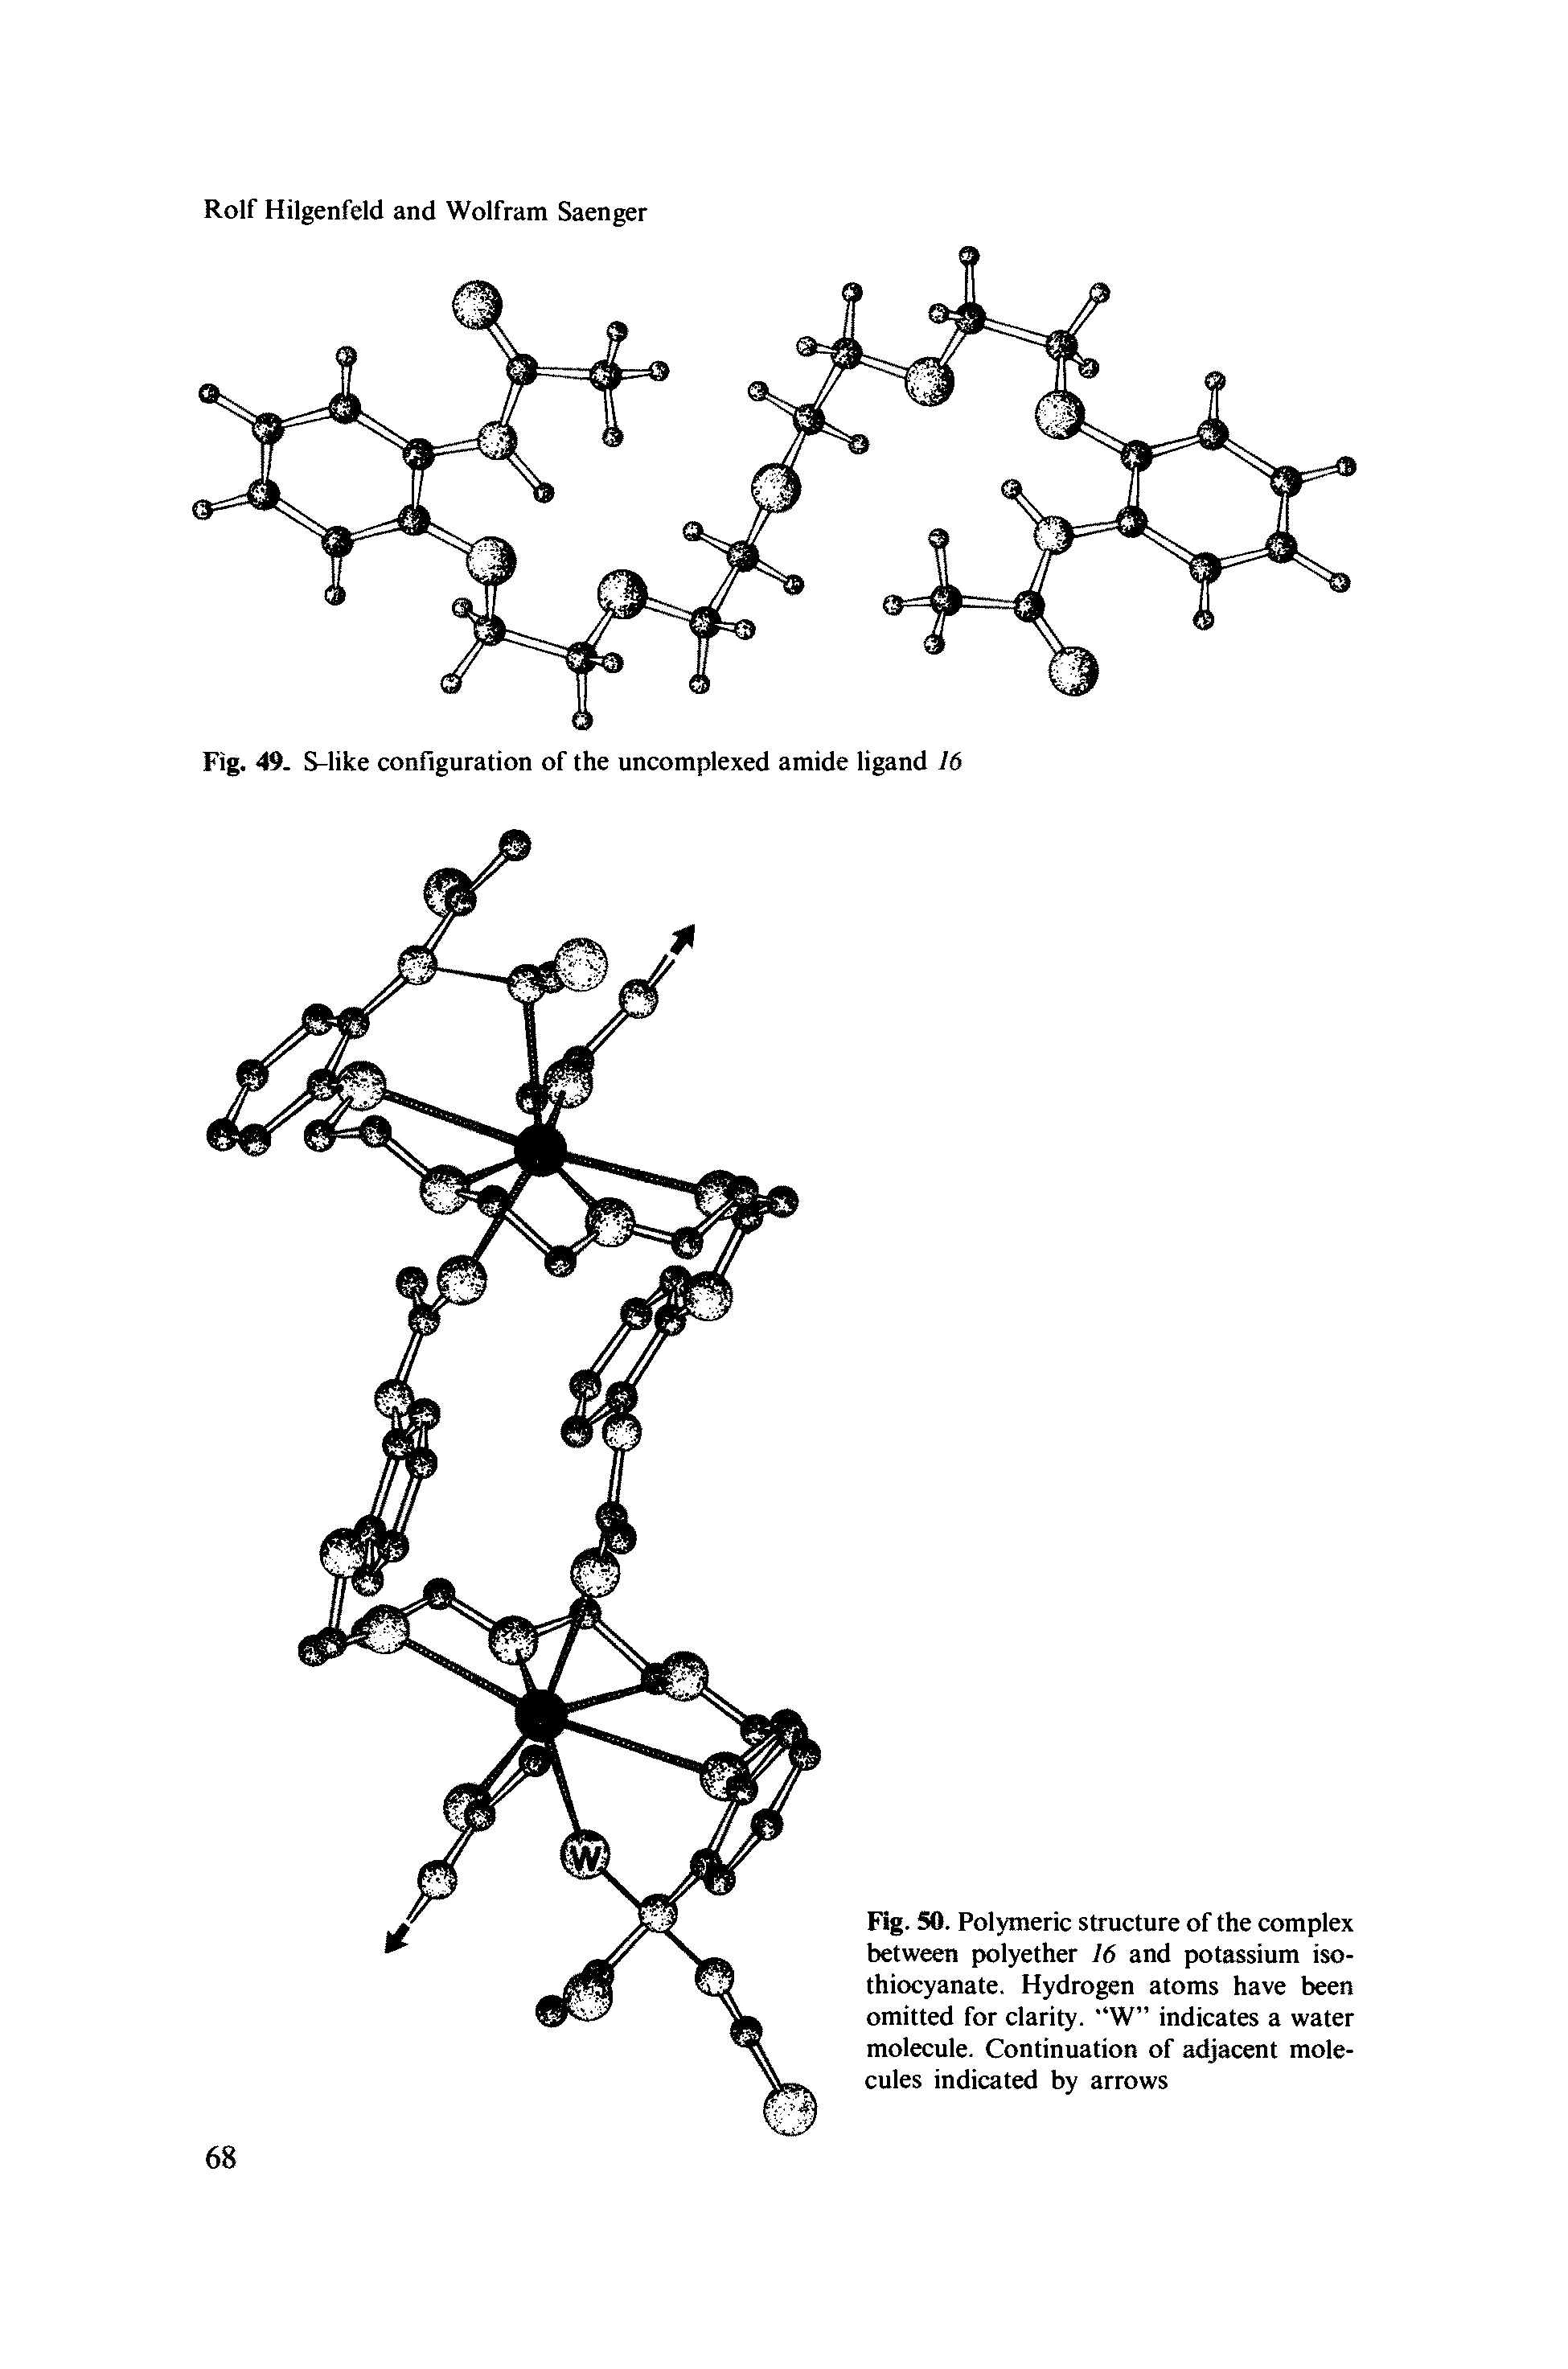 Fig. 50. Polymeric structure of the complex between polyether 16 and potassium isothiocyanate. Hydrogen atoms have been omitted for clarity. "W indicates a water molecule. Continuation of adjacent molecules indicated by arrows...